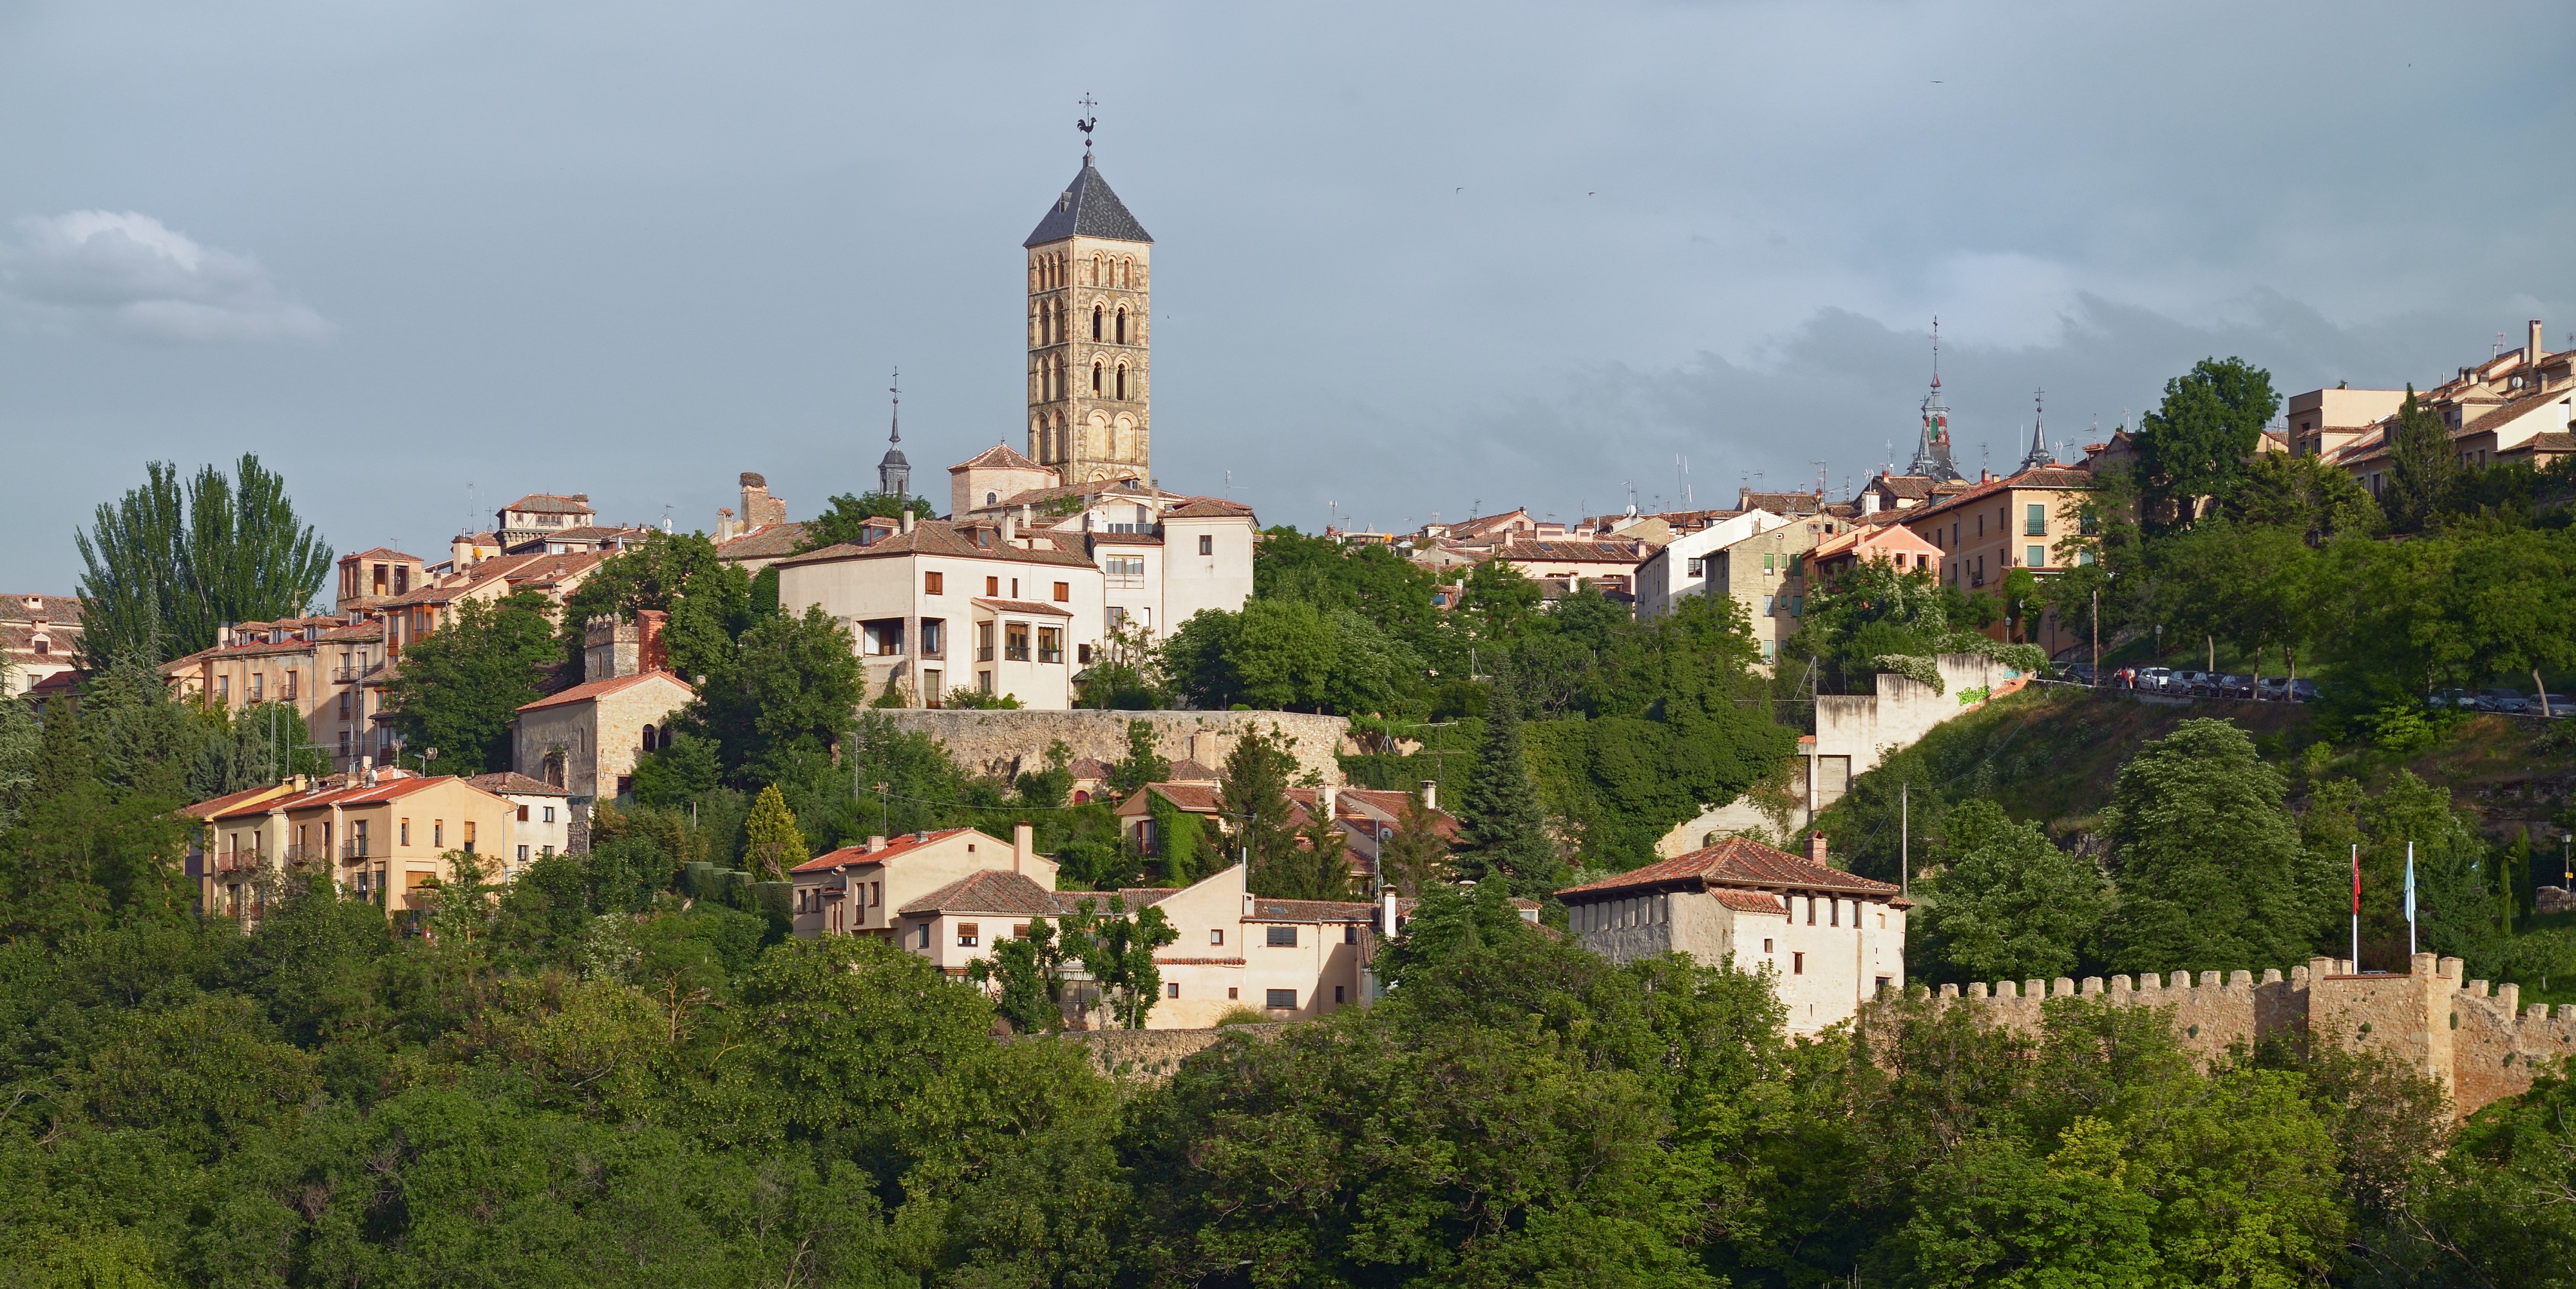 Church of San Esteban in Segovia. View from the north-west